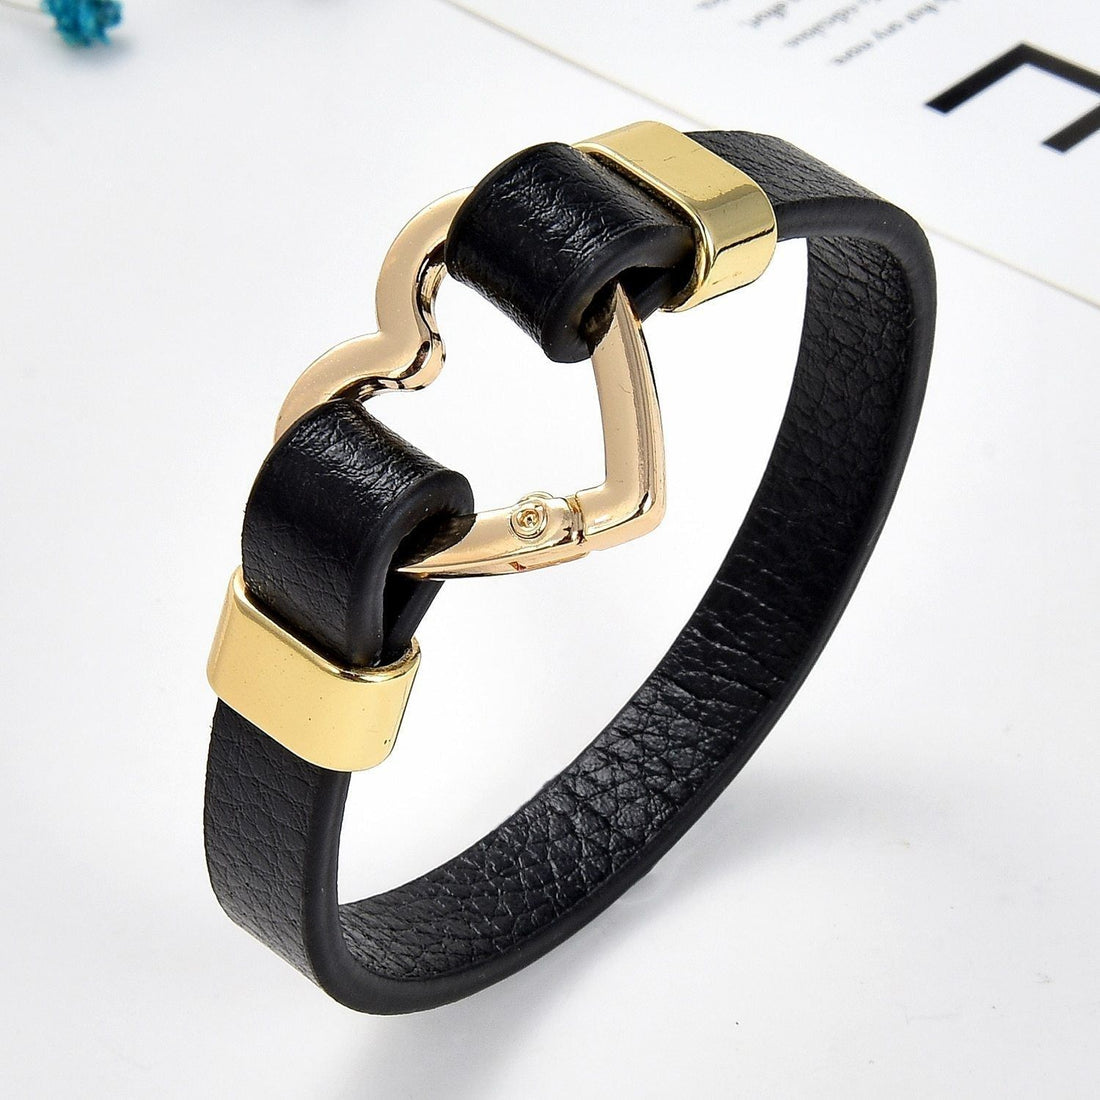 Bracelet Charm Jewelry 2021 Trendy Heart Shape Clasp Gold Metal Black Leather - Touchy Style .